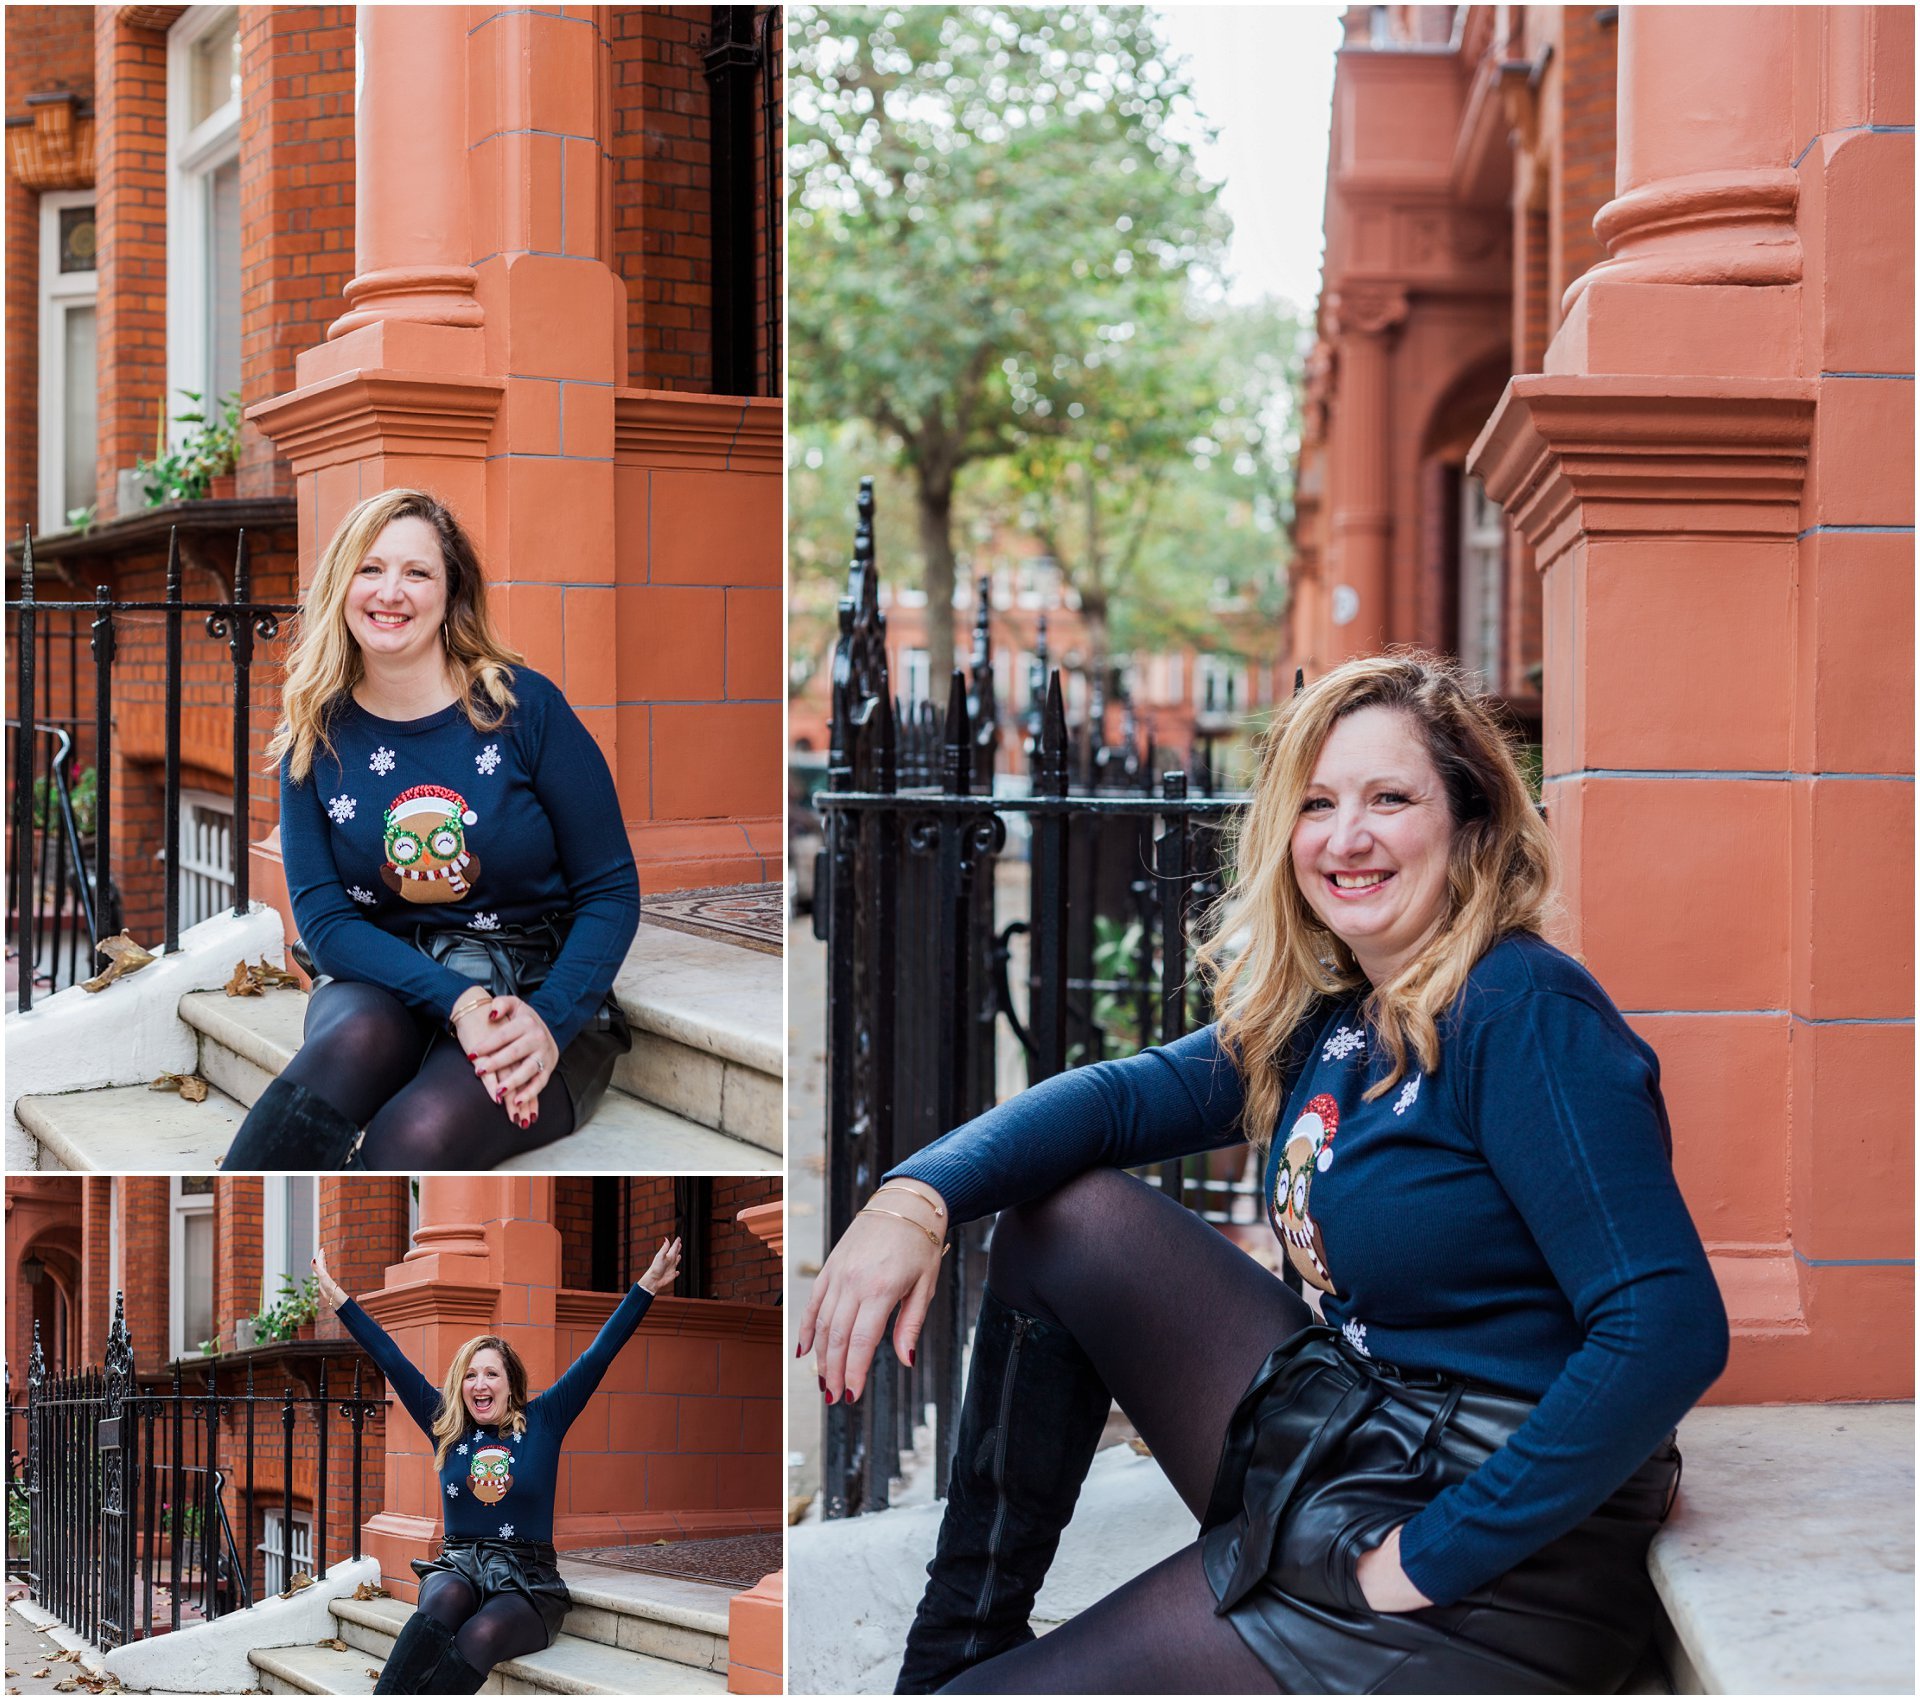 Christmas London brand portraits with Shelly Shulman Strategy. Images by London brand photographer AKP Branding Stories